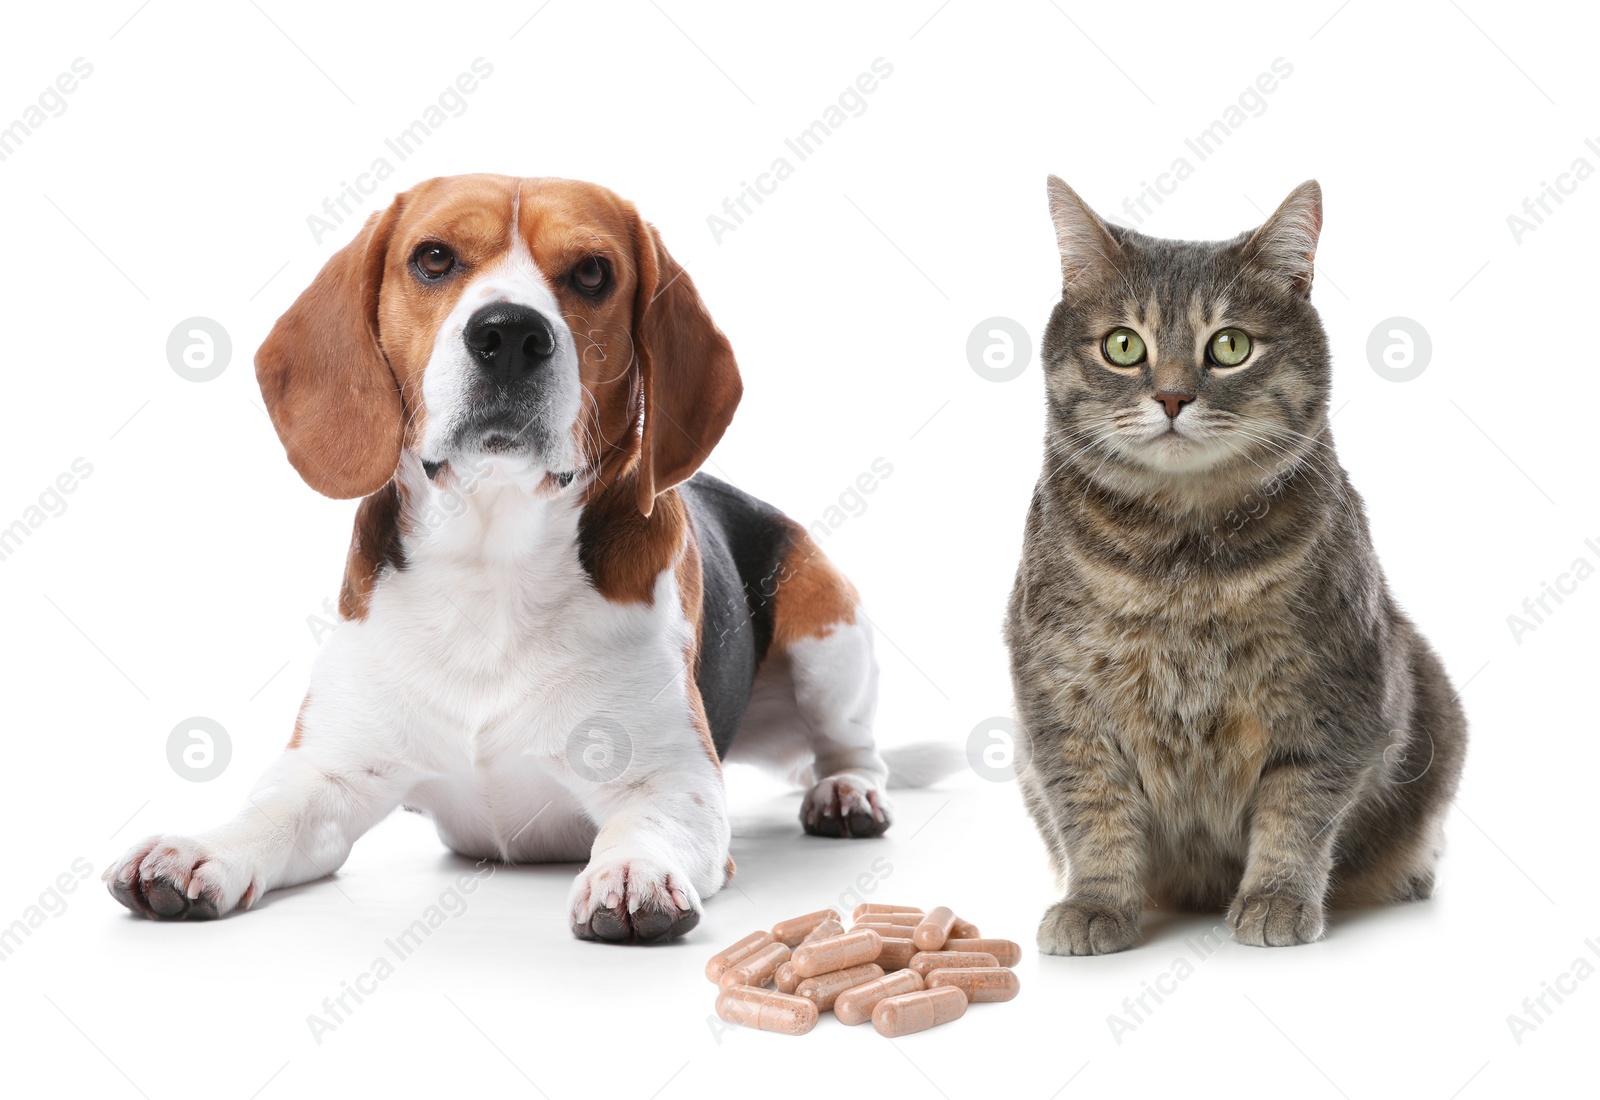 Image of Vitamins for pets. Cute dog with cat and pills on white background